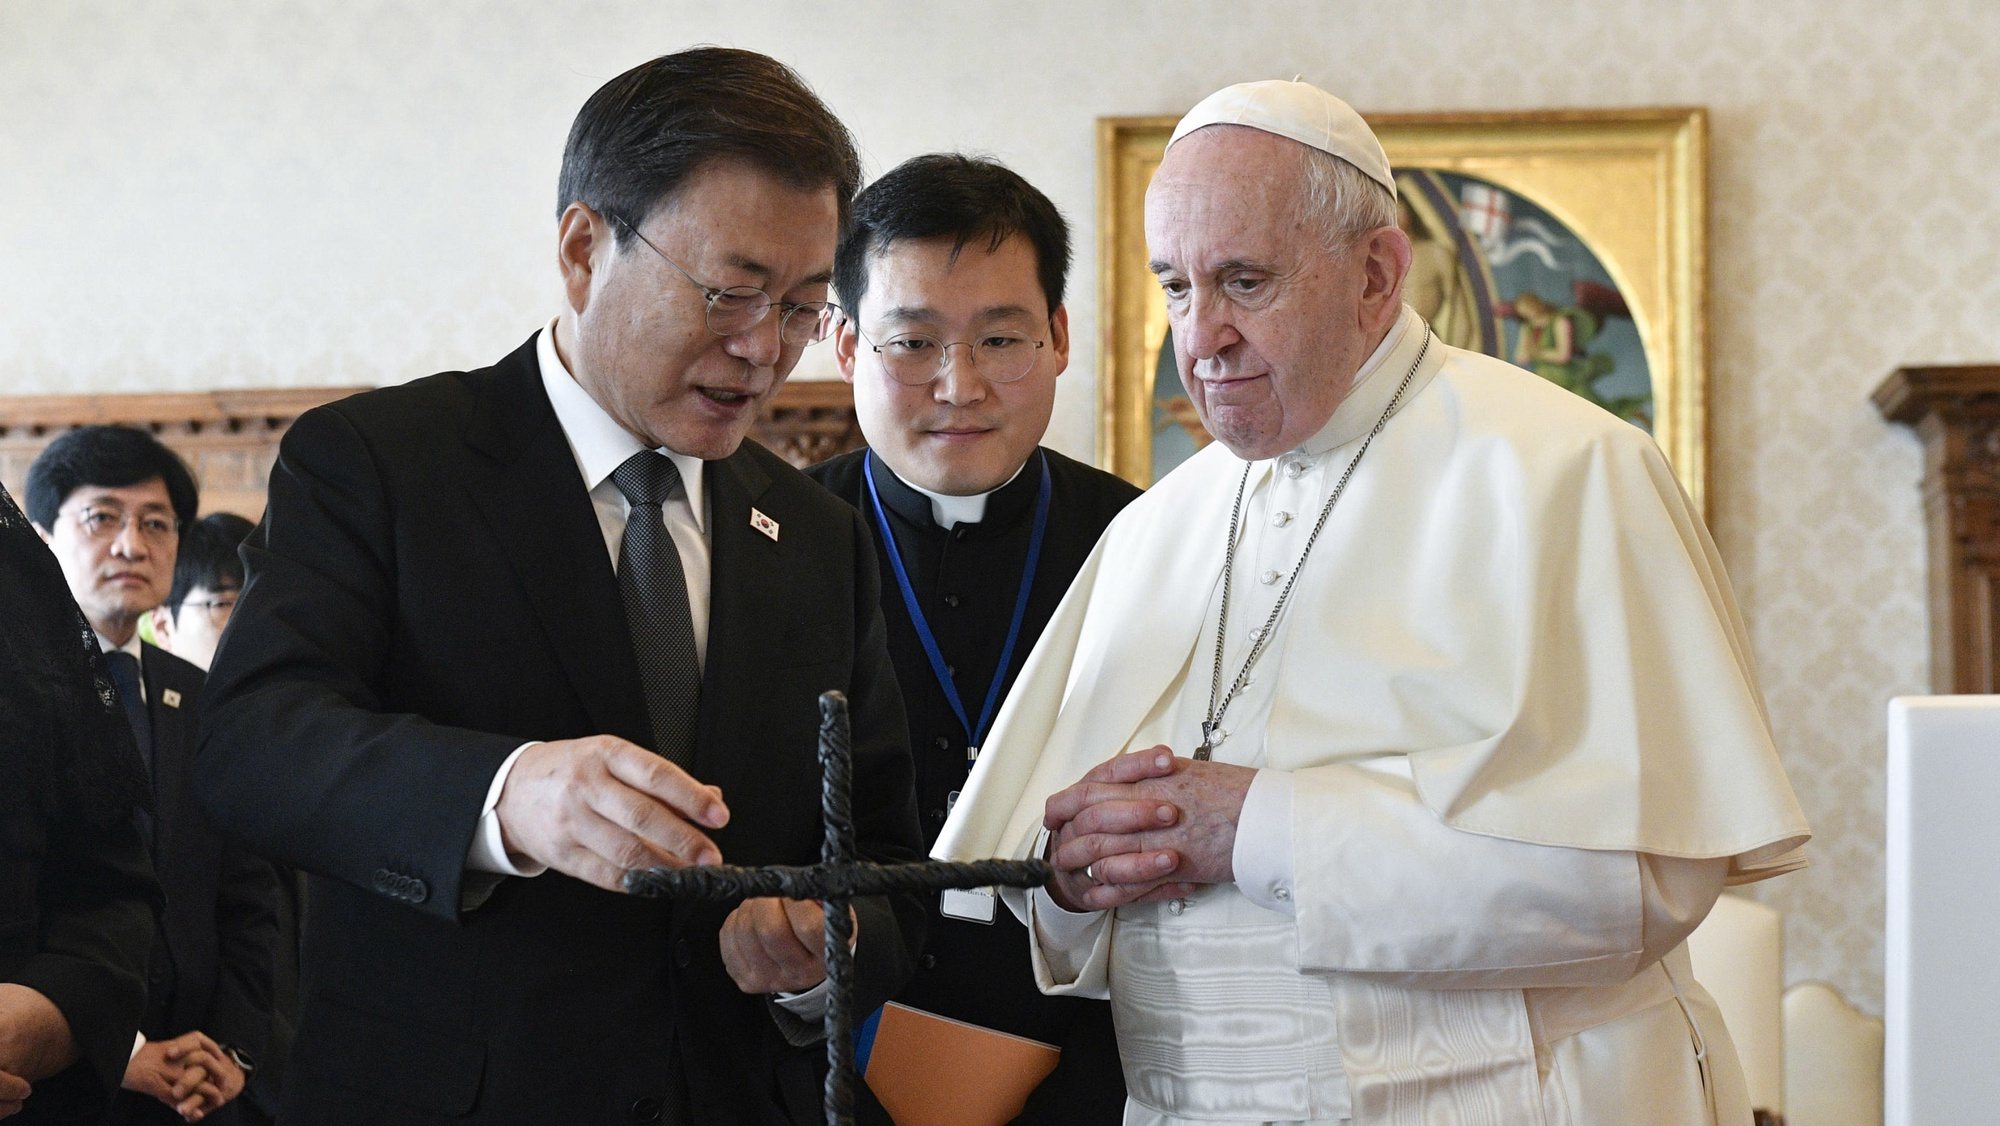 epa09551891 A handout picture provided by the Vatican Media shows Pope Francis (R) exchanging gifts with South Korea&#039;s President Moon Jae-in (L) during a private audience, in Vatican City, 29 October 2021, ahead of an upcoming G20 summit of world leaders in Rome to discuss climate change, COVID-19 and the post-pandemic global recovery.  EPA/VATICAN MEDIA HANDOUT  HANDOUT EDITORIAL USE ONLY/NO SALES